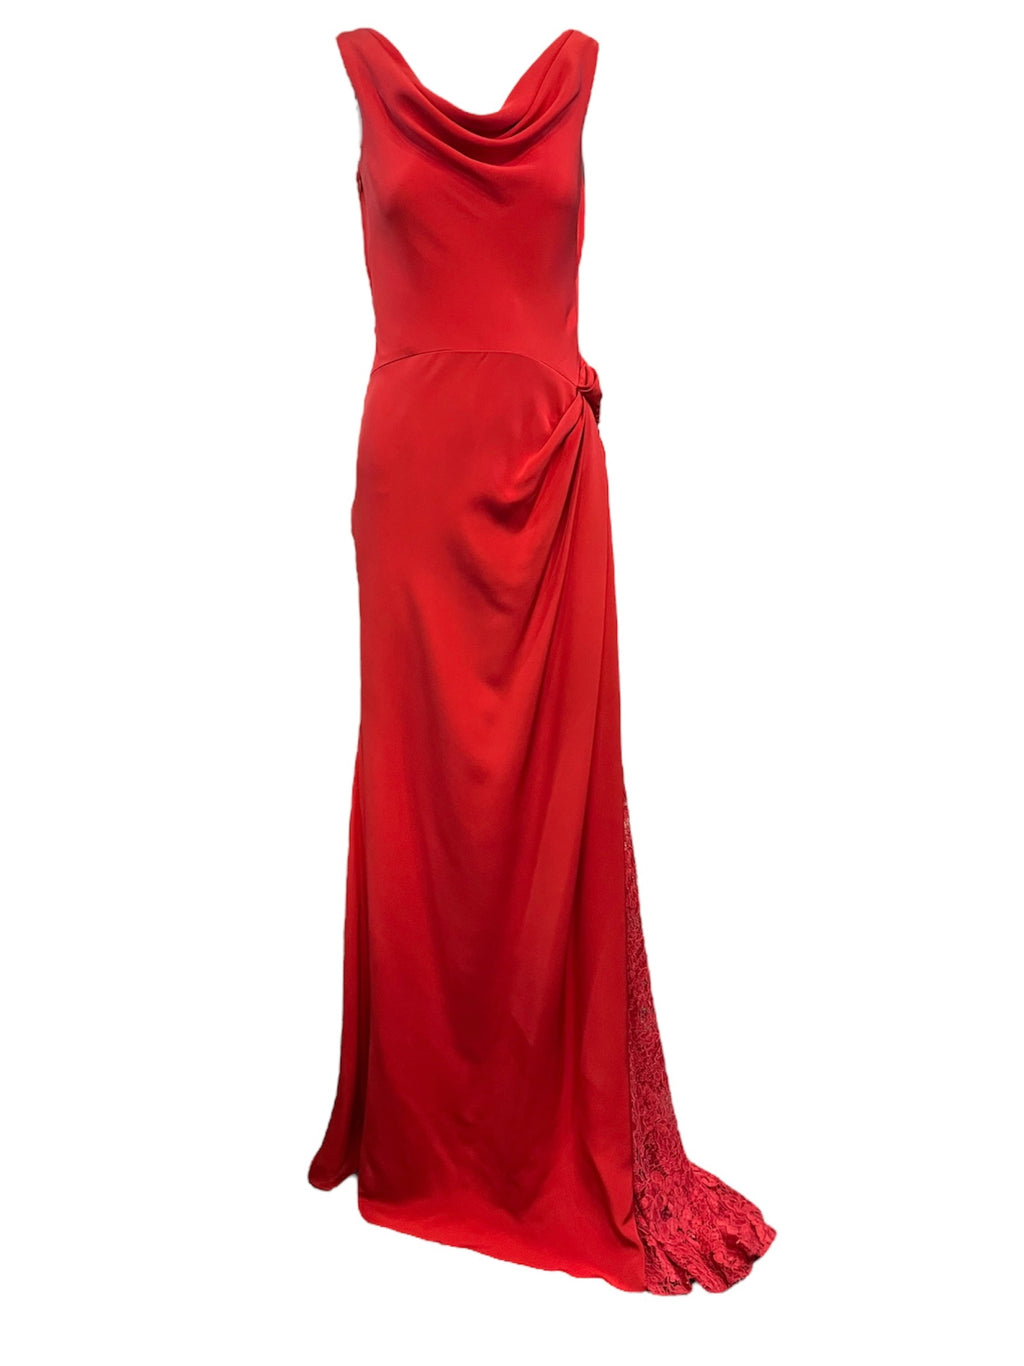 2010s Lorena Sarbu  Attribution Red Silk Gown with Train FRONT 1 of 4